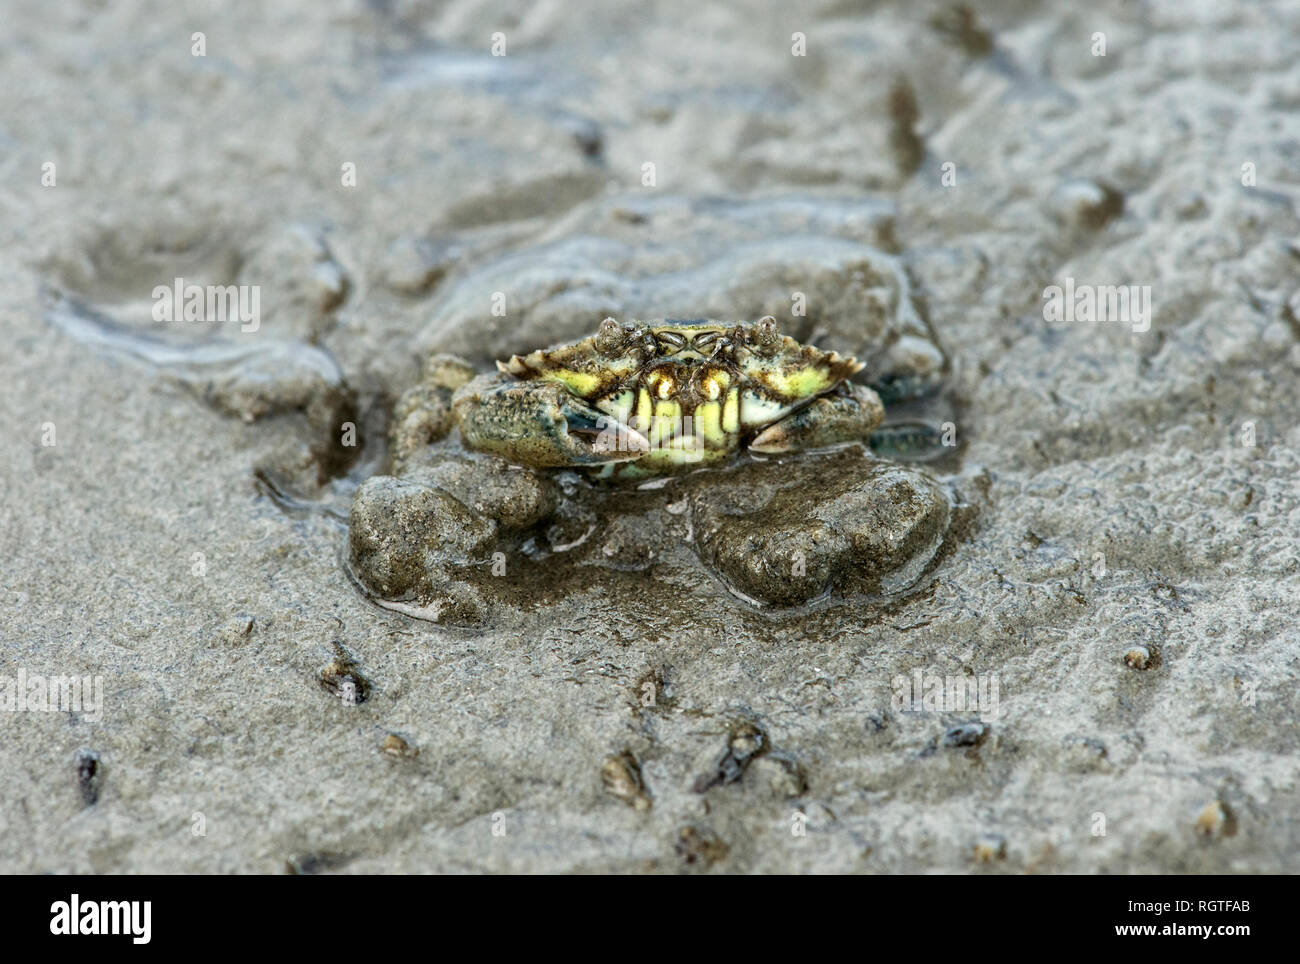 Common shore crab (Carcinus maenas) buried into the sand leaving only its eyes sticking out, Wadden Sea, Schleswig-Holstein, Germany Stock Photo